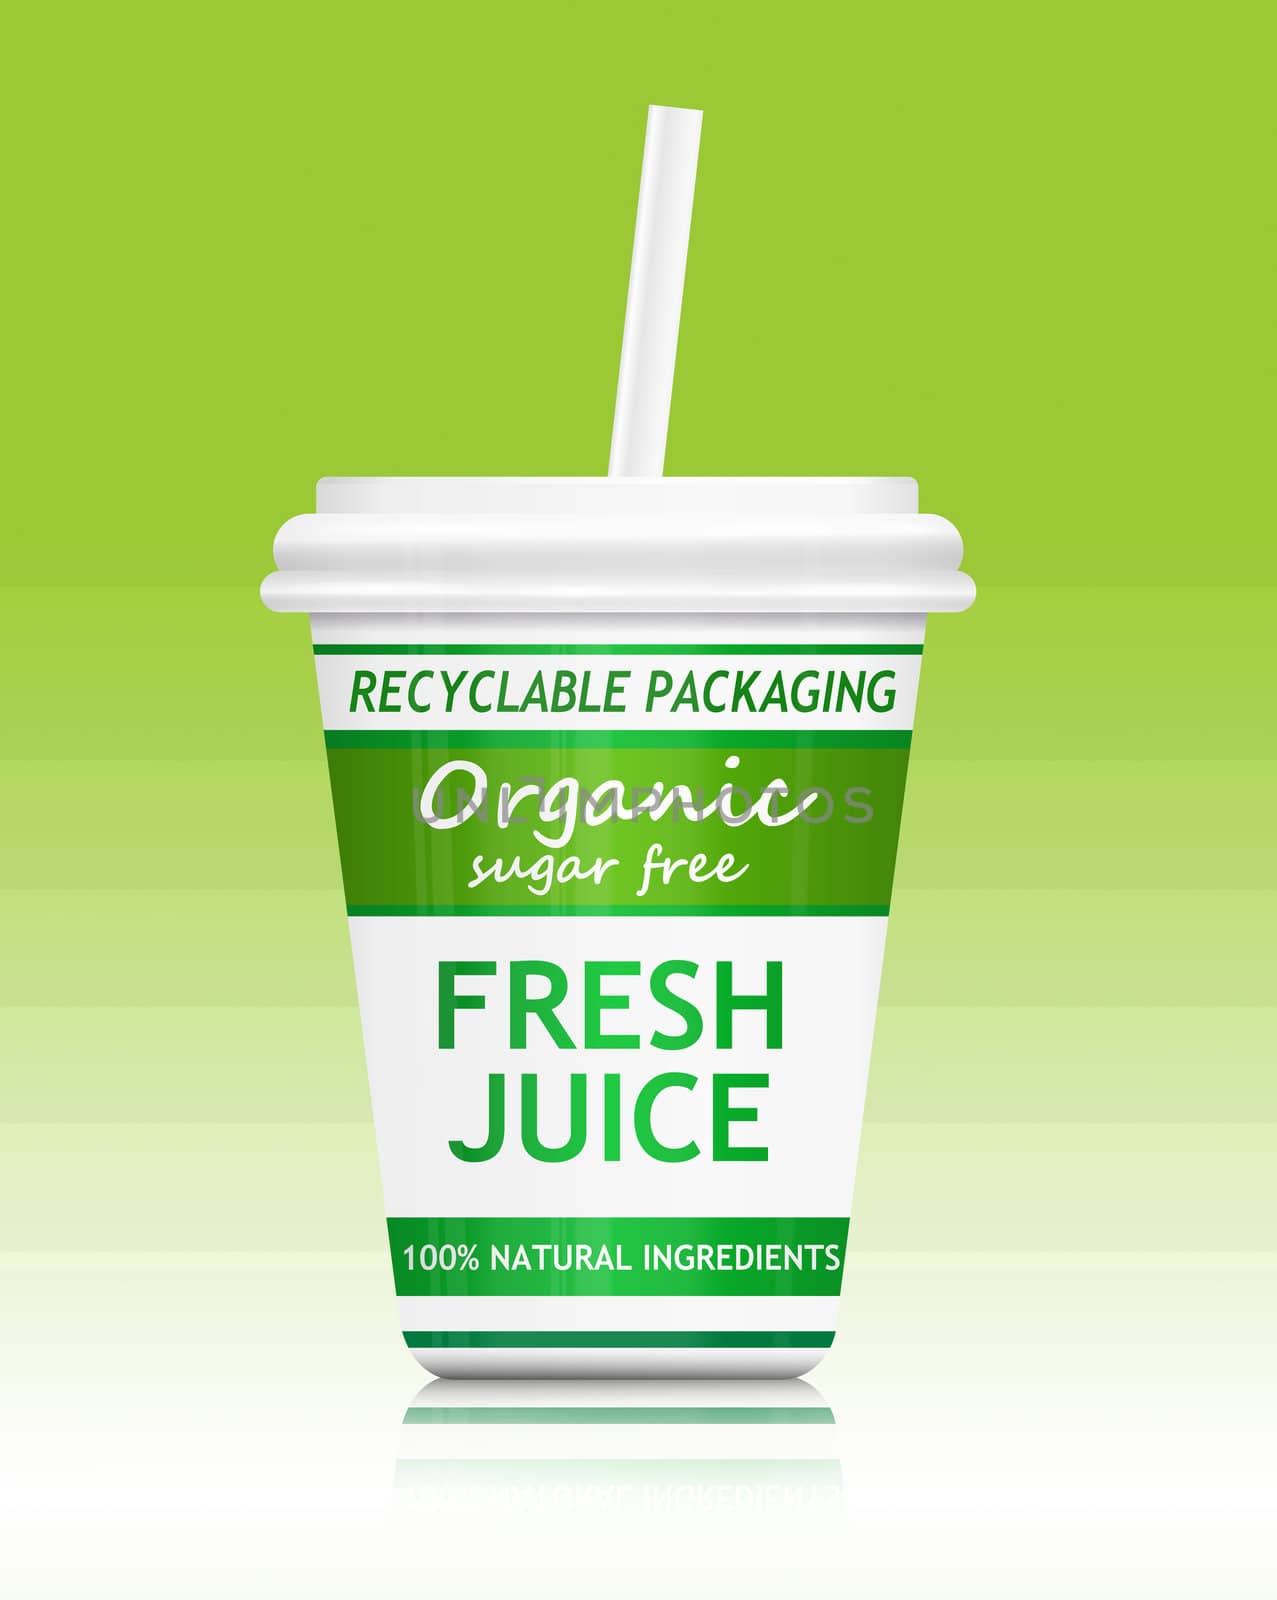 Illustration depicting a fast food drink container with a healthy and environmental concept. Arranged over green gradient.